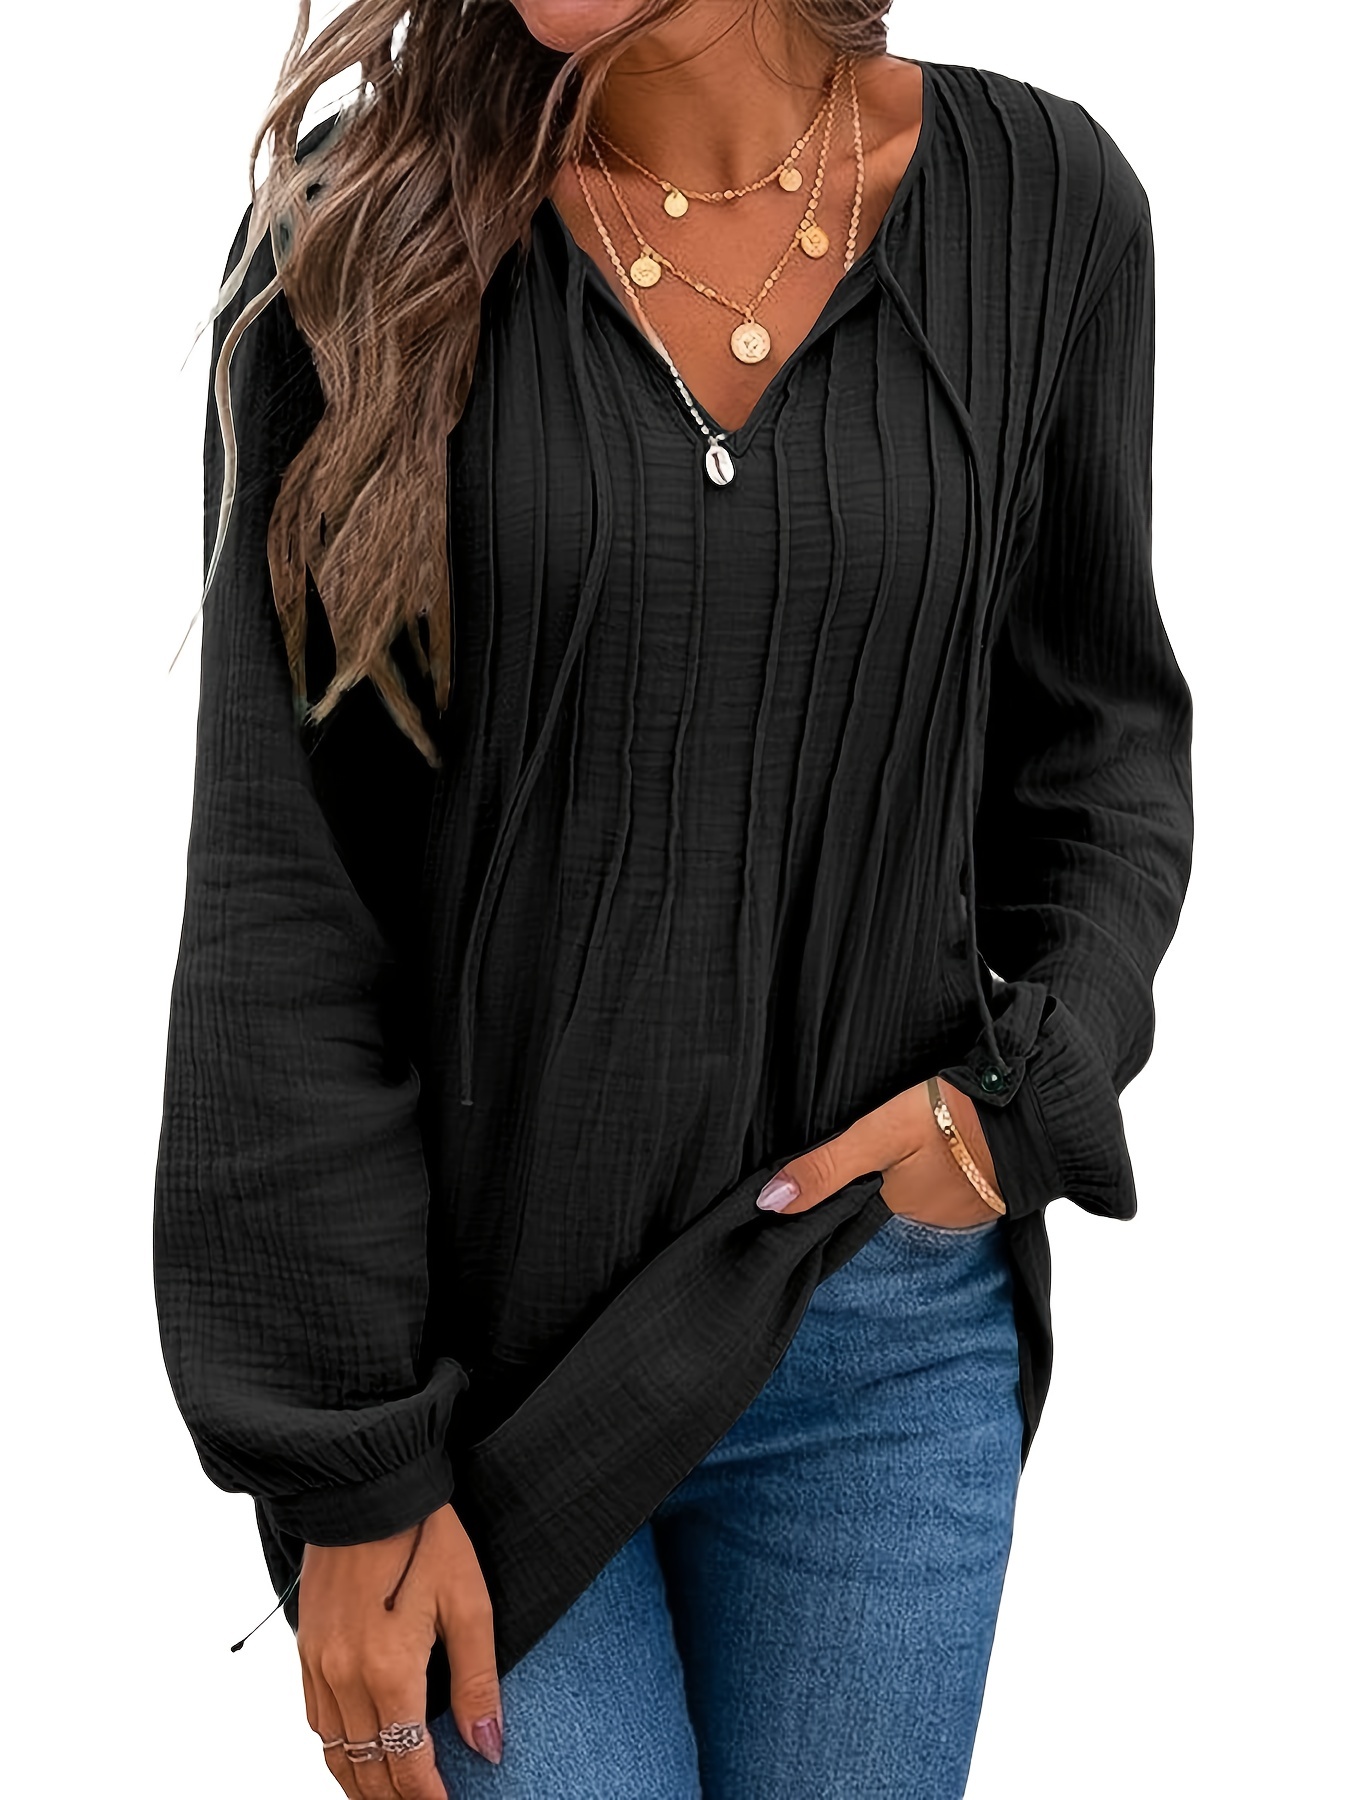 Women's Tops Fashion V neck Long Sleeve Solid Casual Pleated